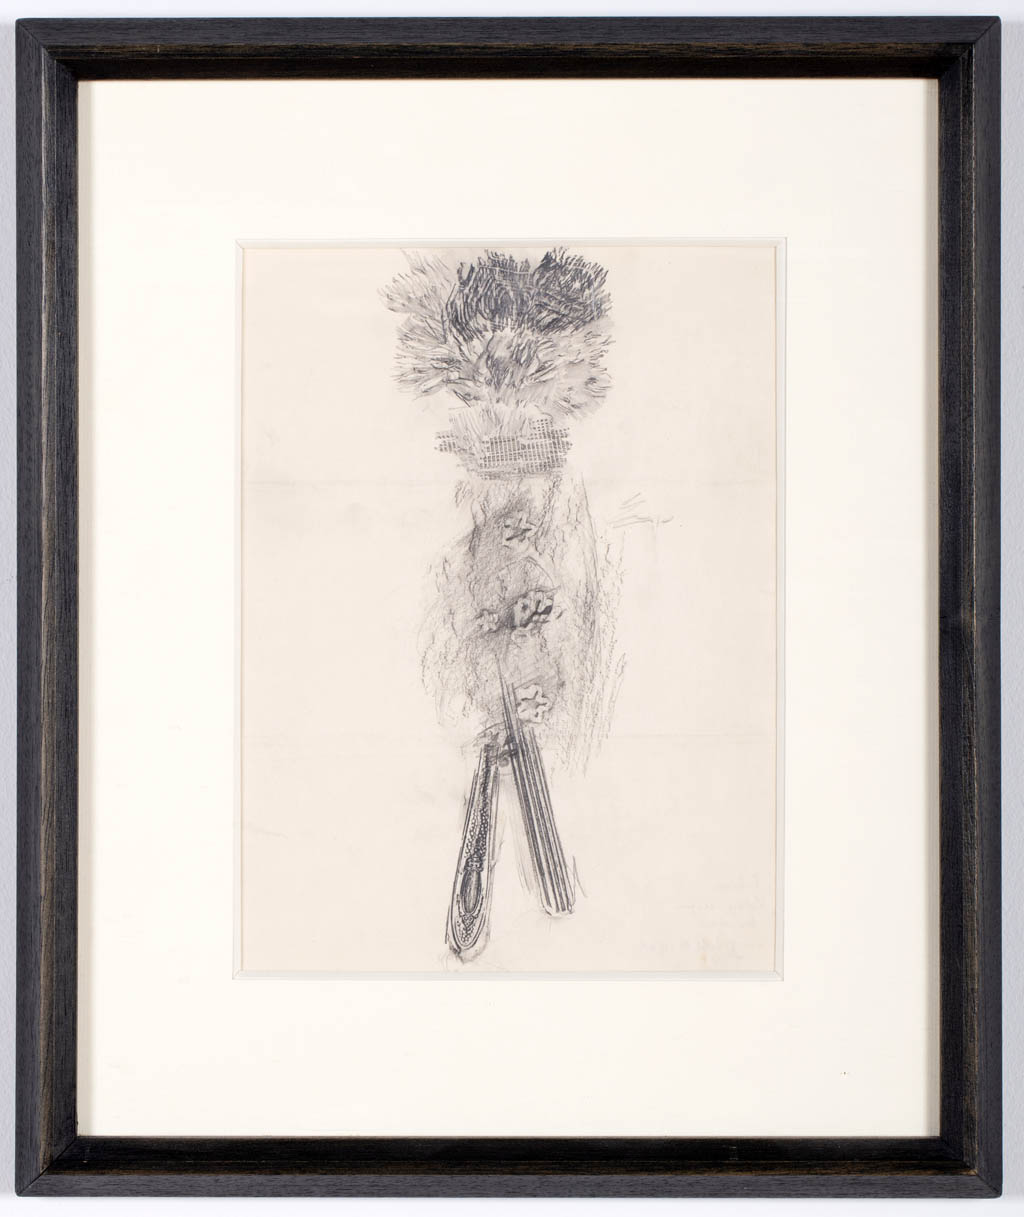 Cadavre Exquis - Exquisite Corpse - (Elisa Breton, Benjamin Peret, Andre Breton) - FRAMED - 1949 pencil and frottage on paper